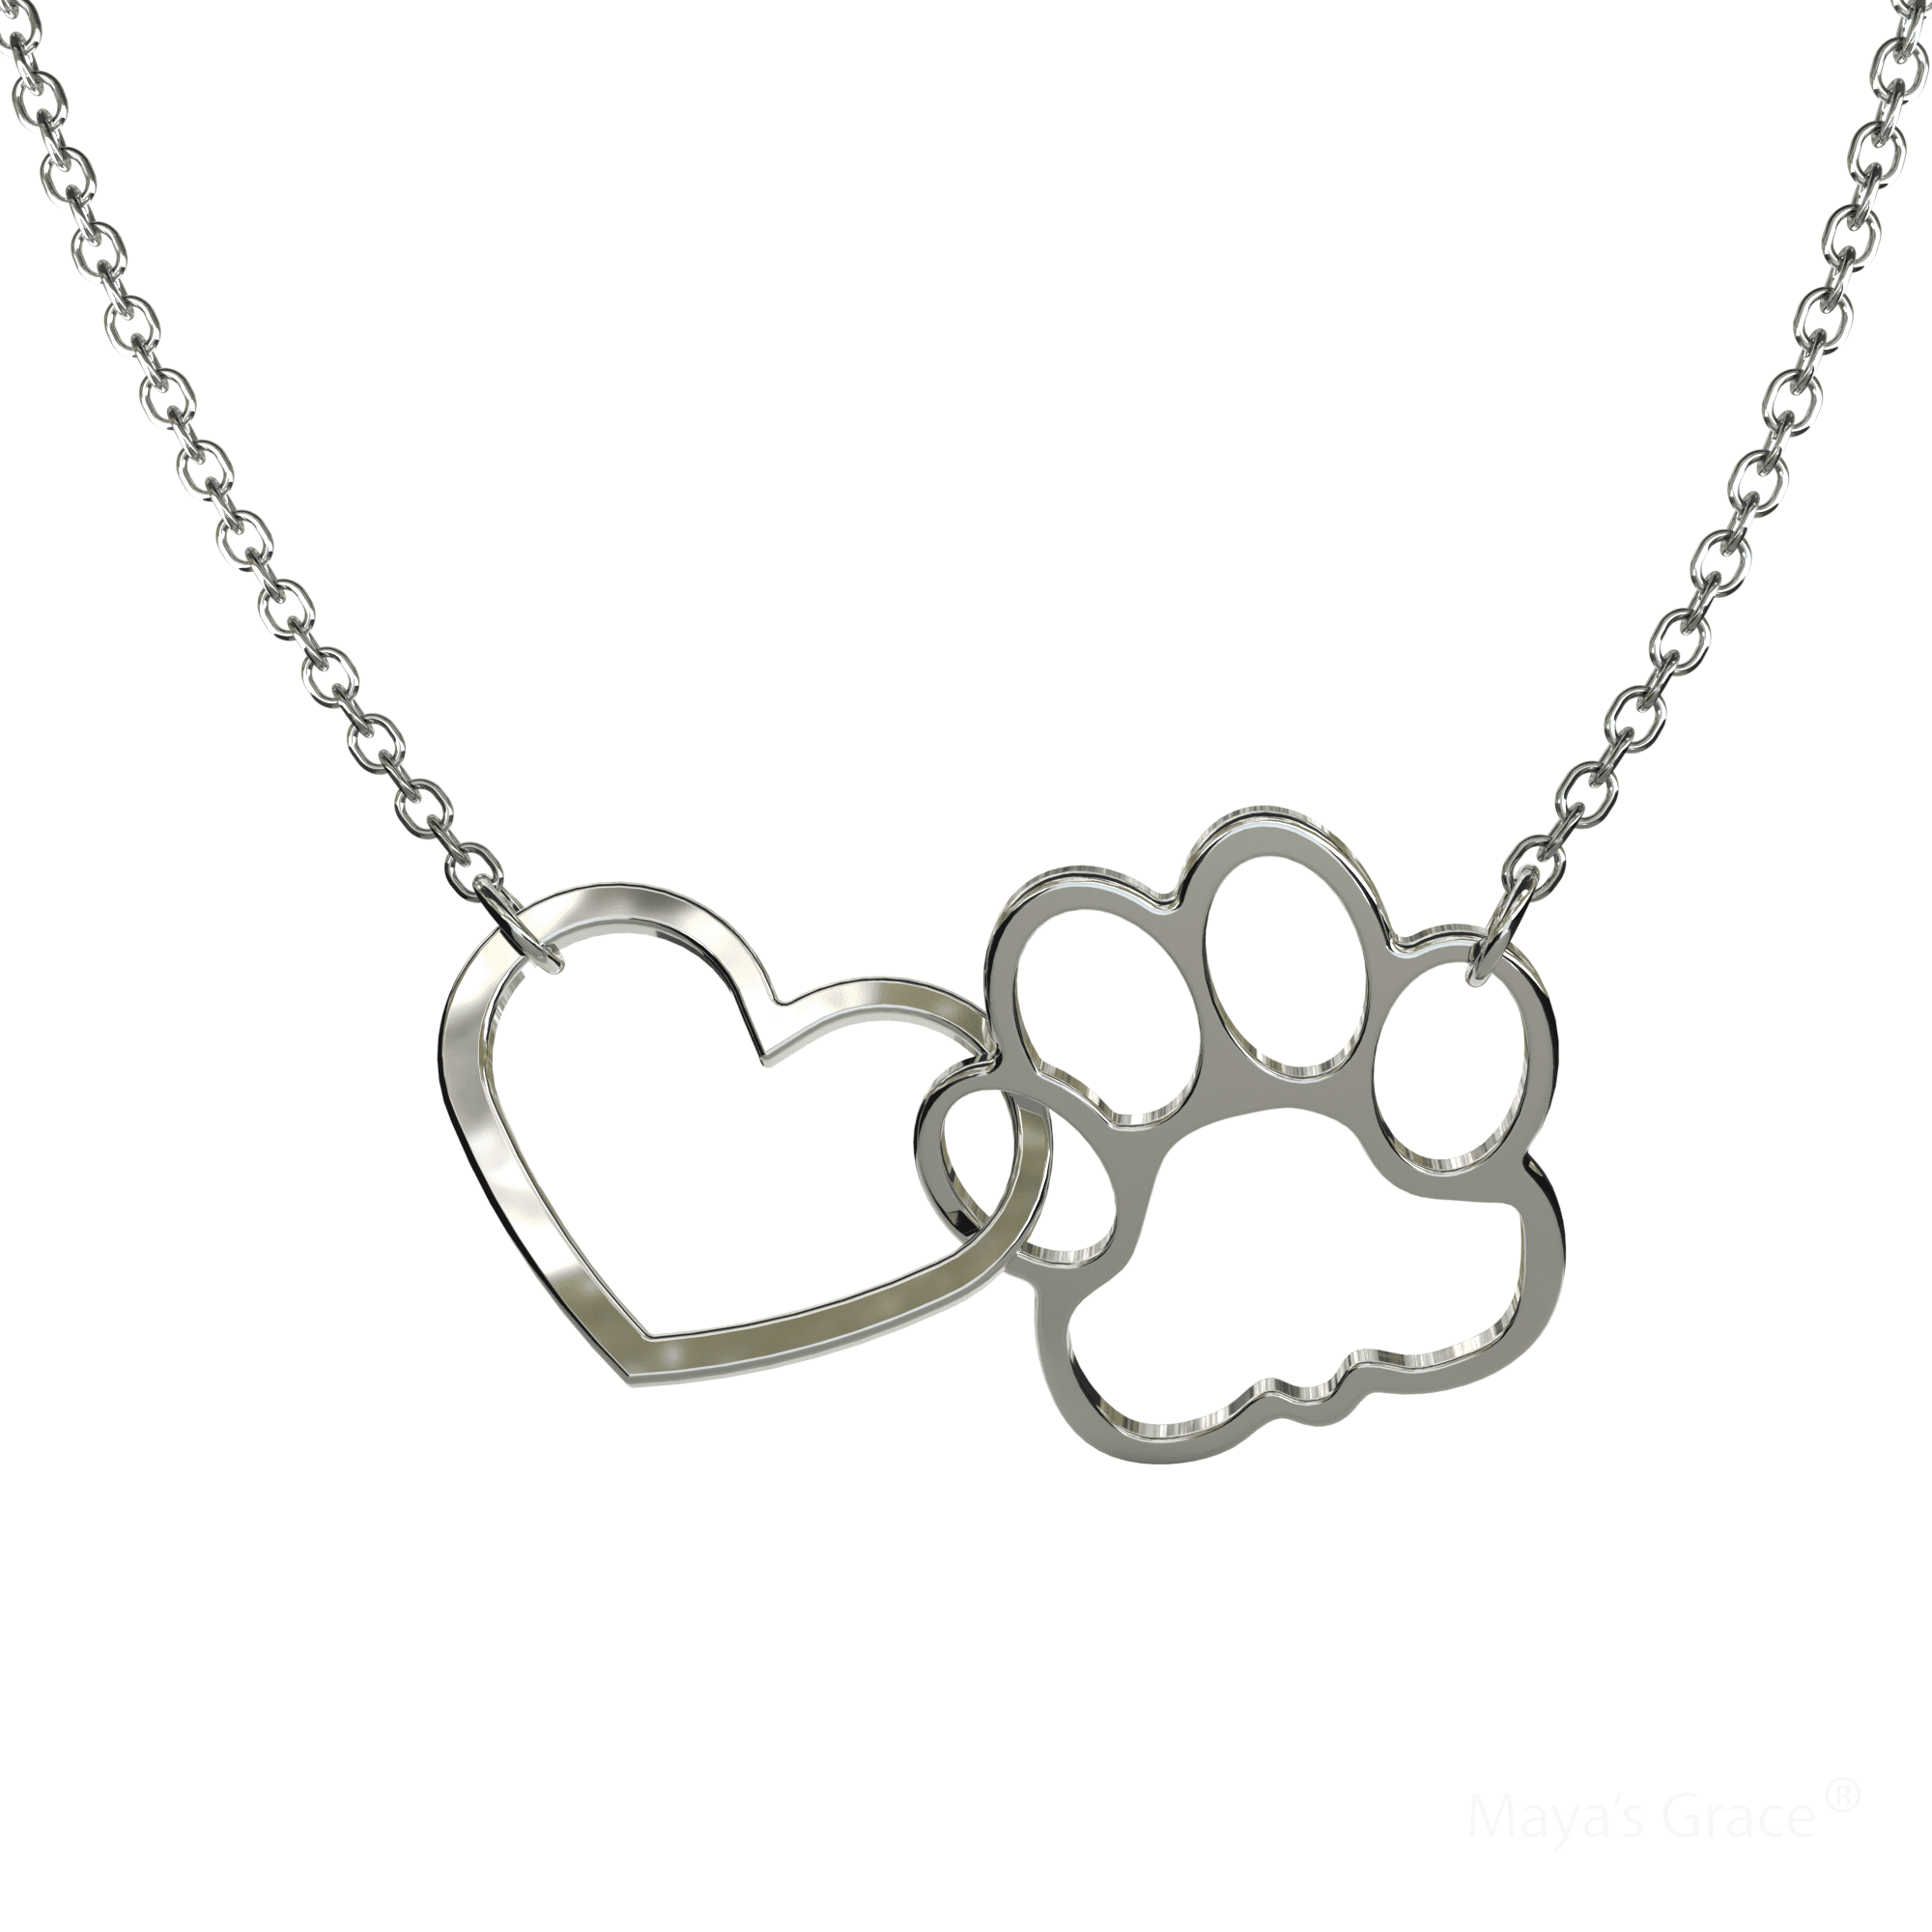 Pet Paw Print Necklace – Reflection of Memories